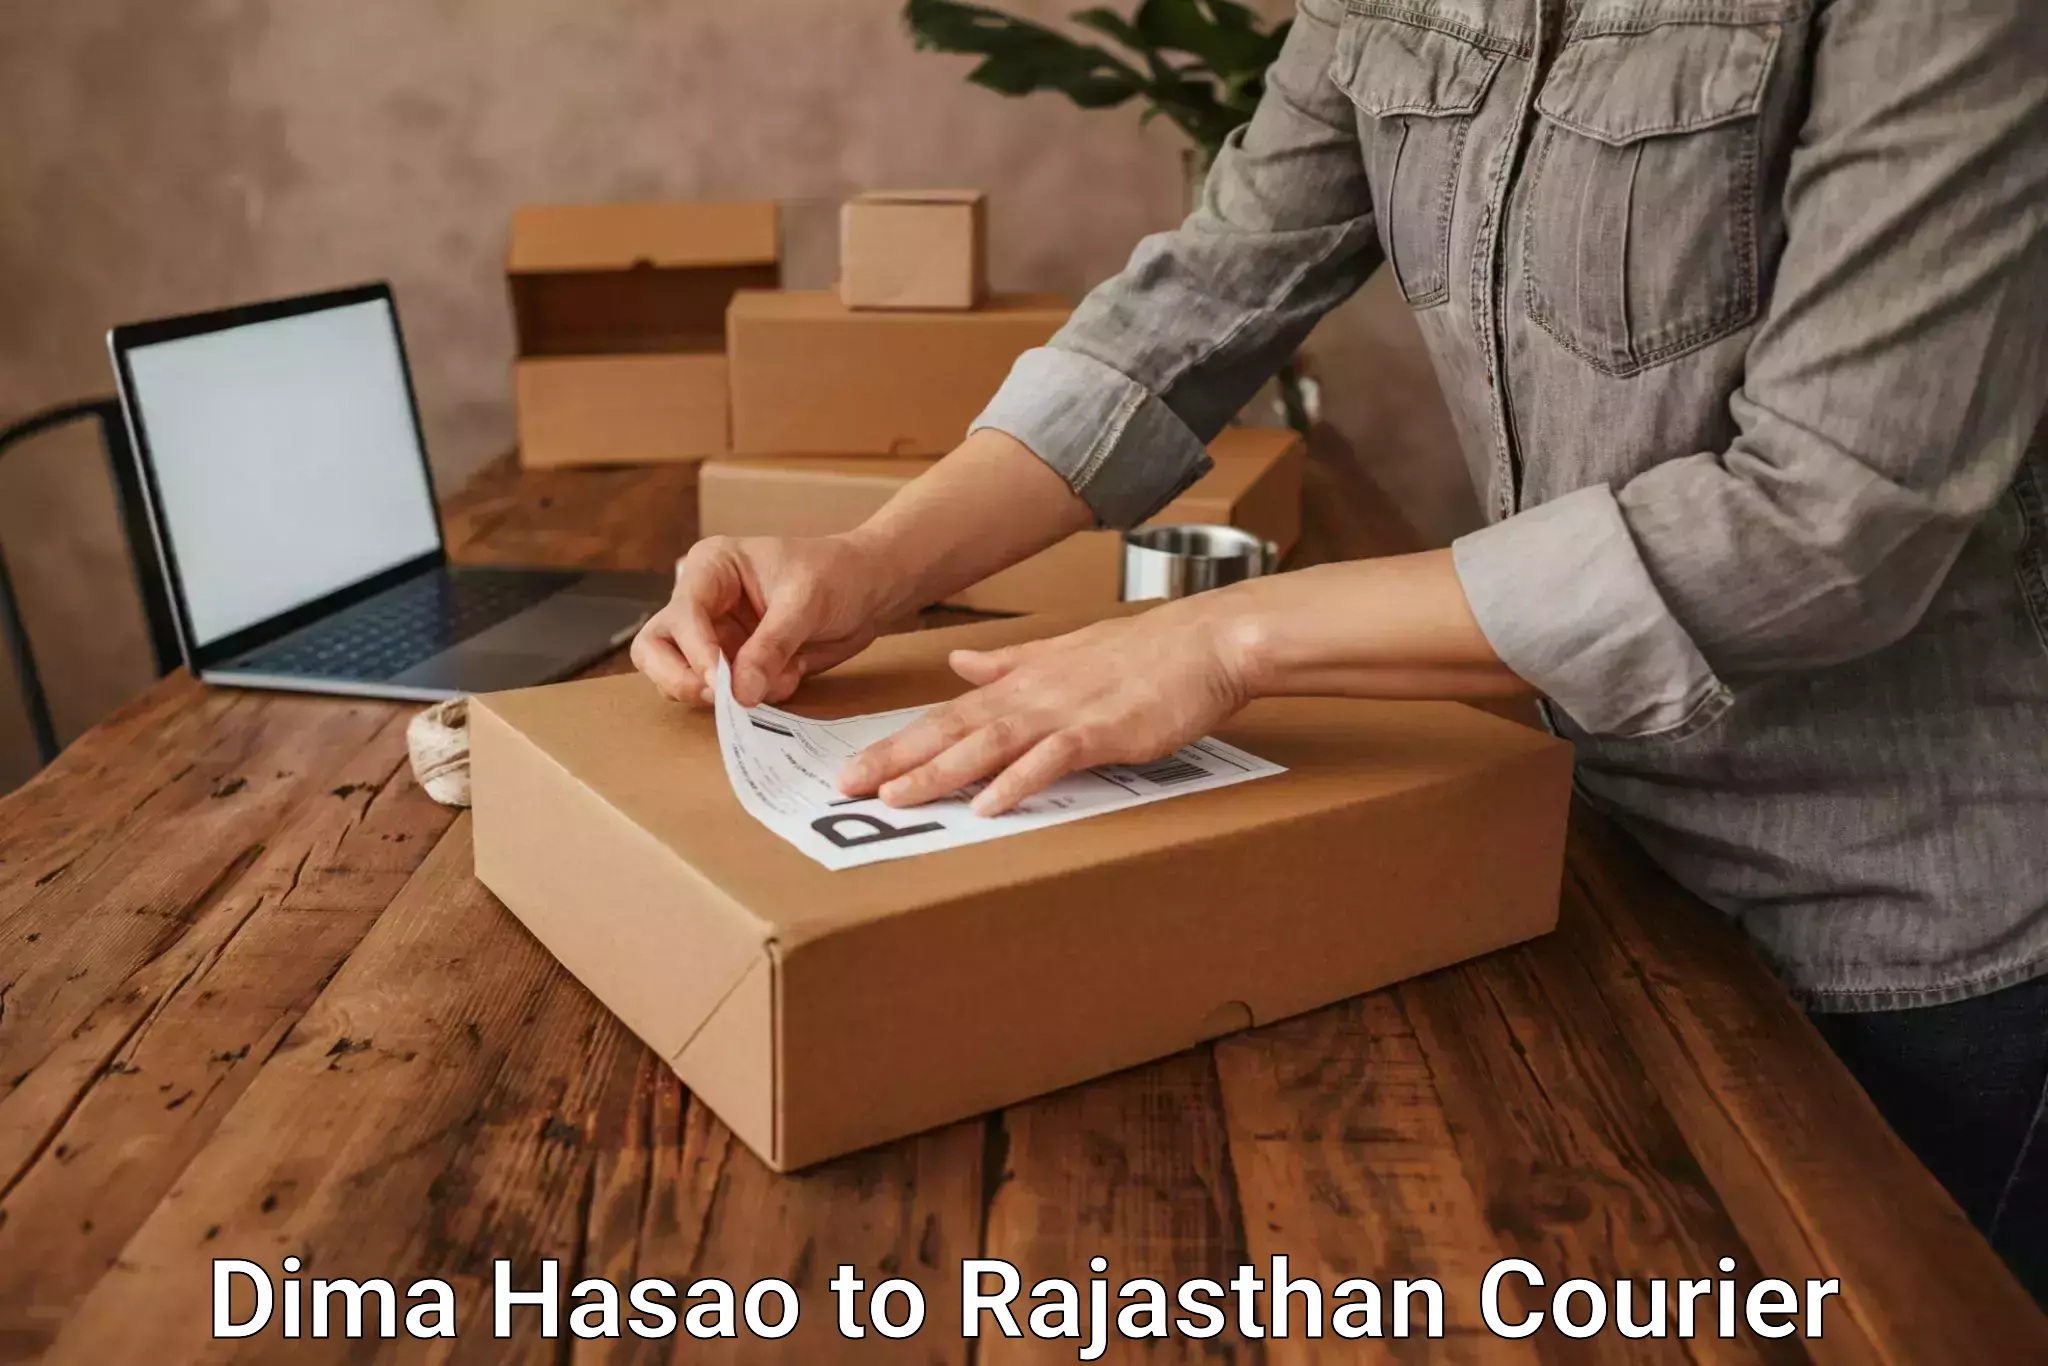 Fast delivery service Dima Hasao to Rajasthan